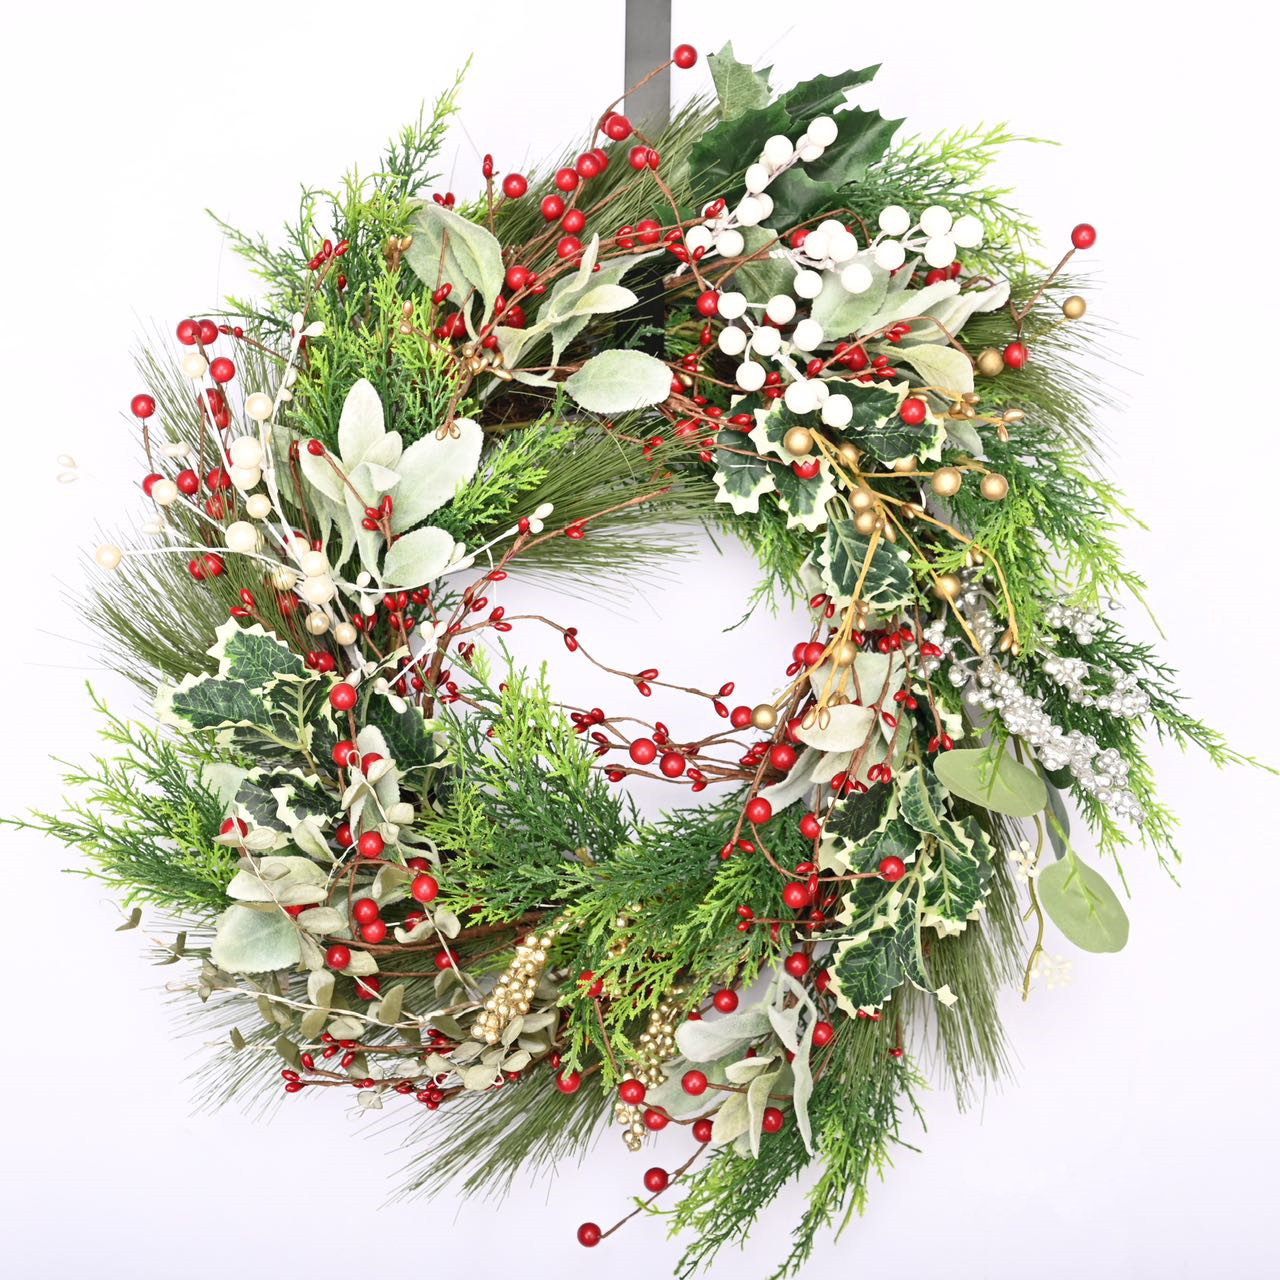  Huashen 24 Inch Winter Front Door Wreath Winter Berry Wreath  Metallic Effect Pearl White & Silver Berry Christmas Wreaths for Front Door  Wall Window Hanging Christmas Decoration Home Décor : Home